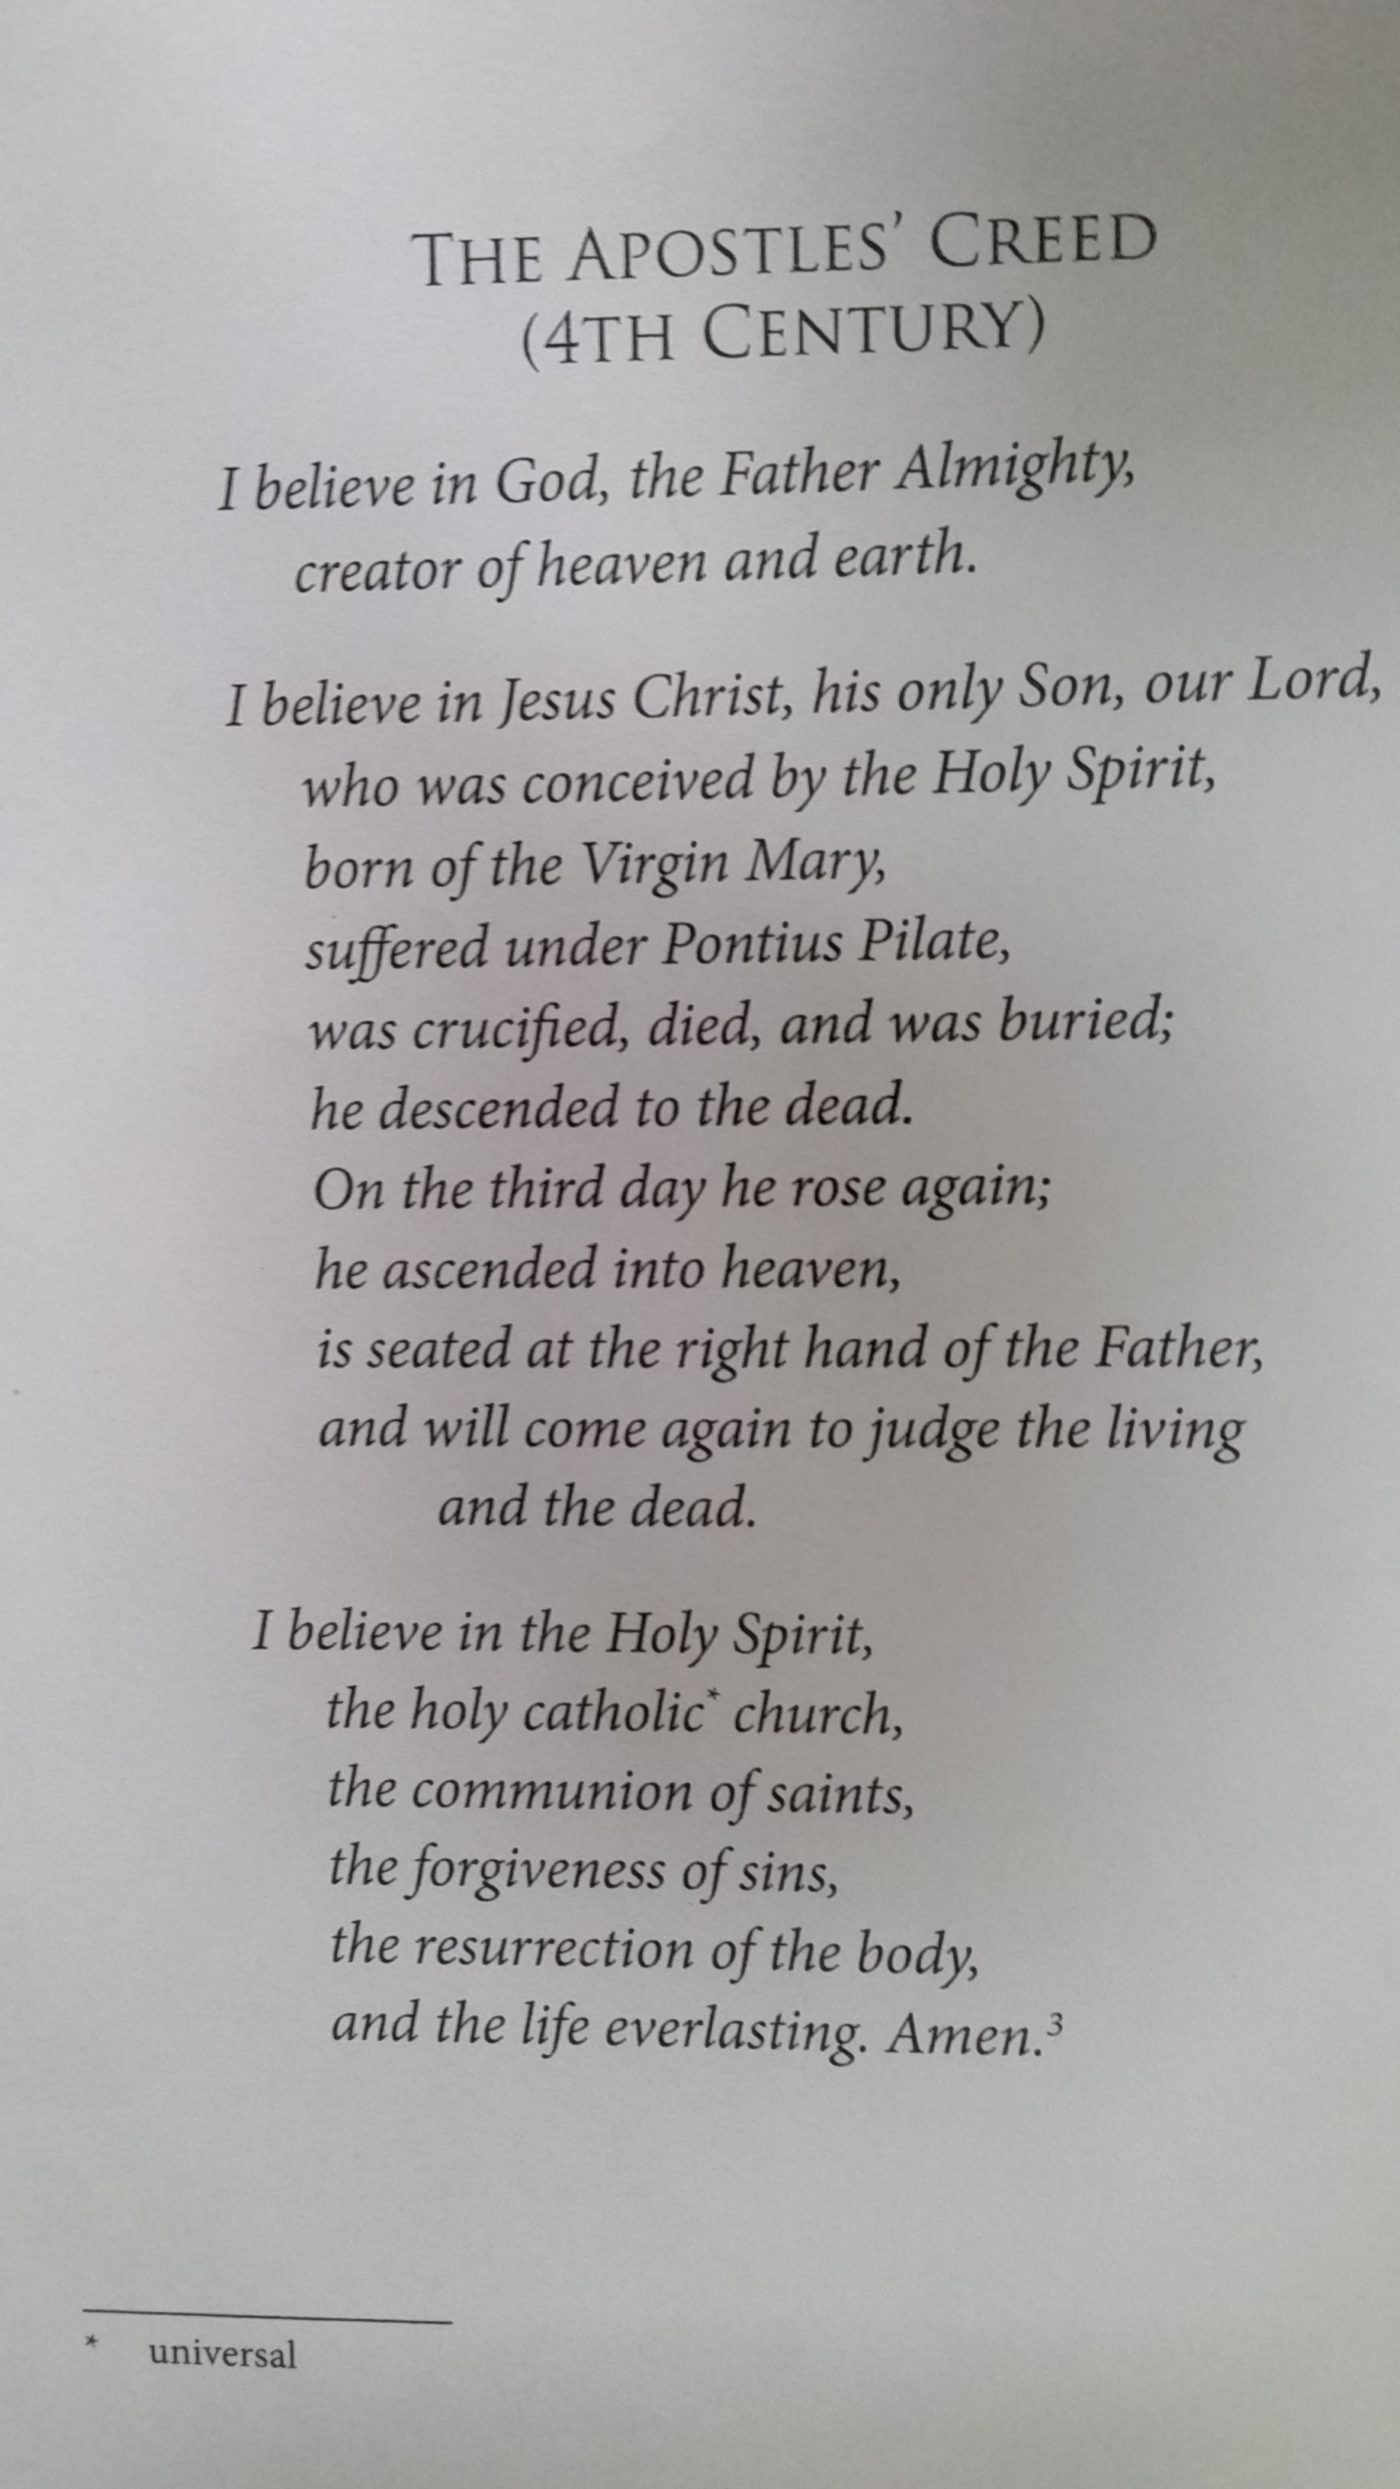 The Apostles’ Creed – Sunday May 14th Trinity Church, Newport at 9am “#2 – Jesus Christ” The Reverend Alan Neale